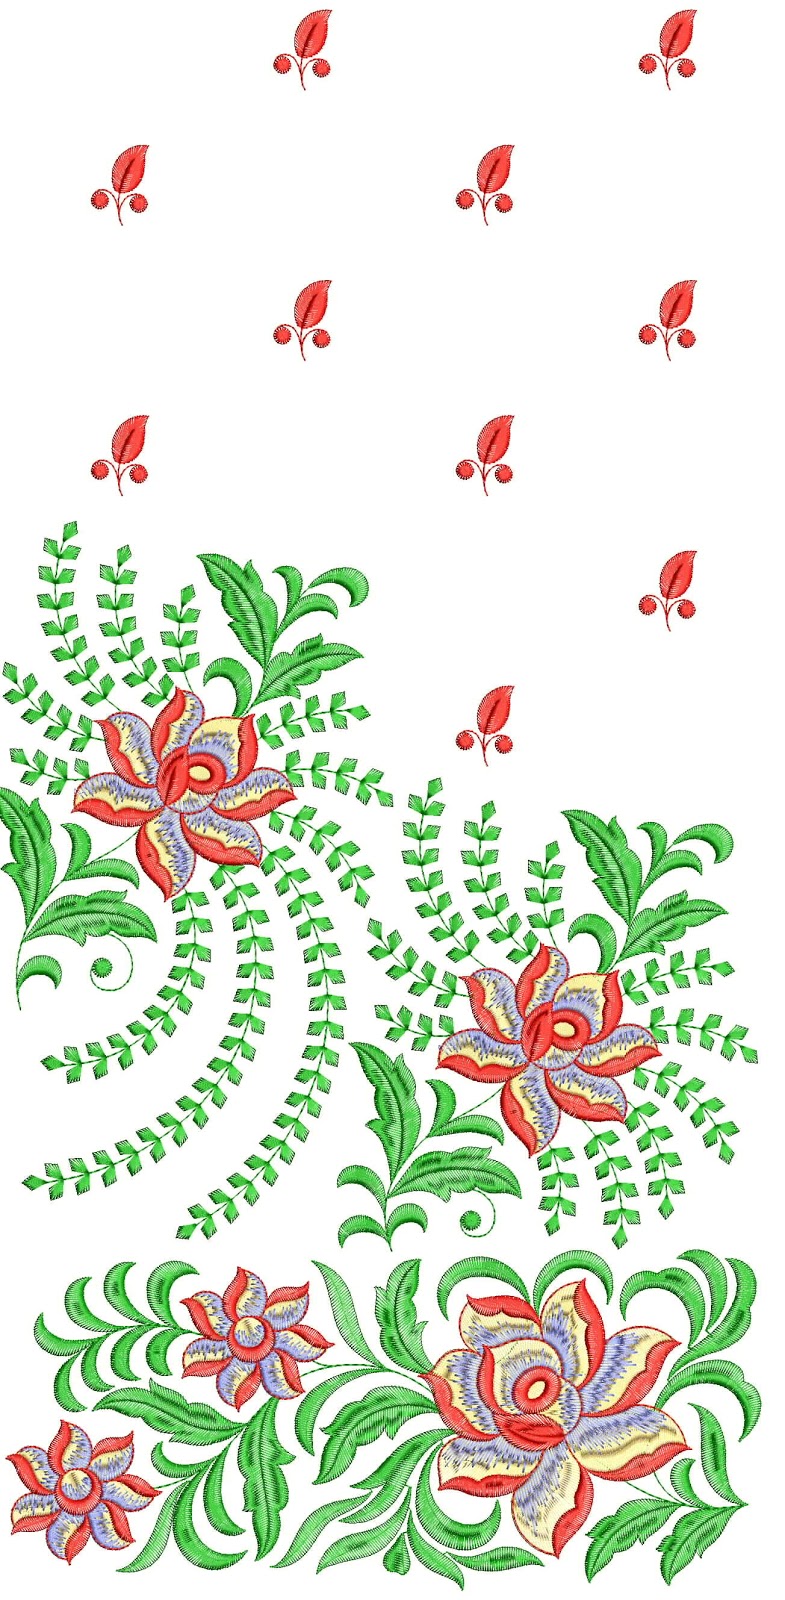 machine embroidery designs - WillyFogg.com - International Product